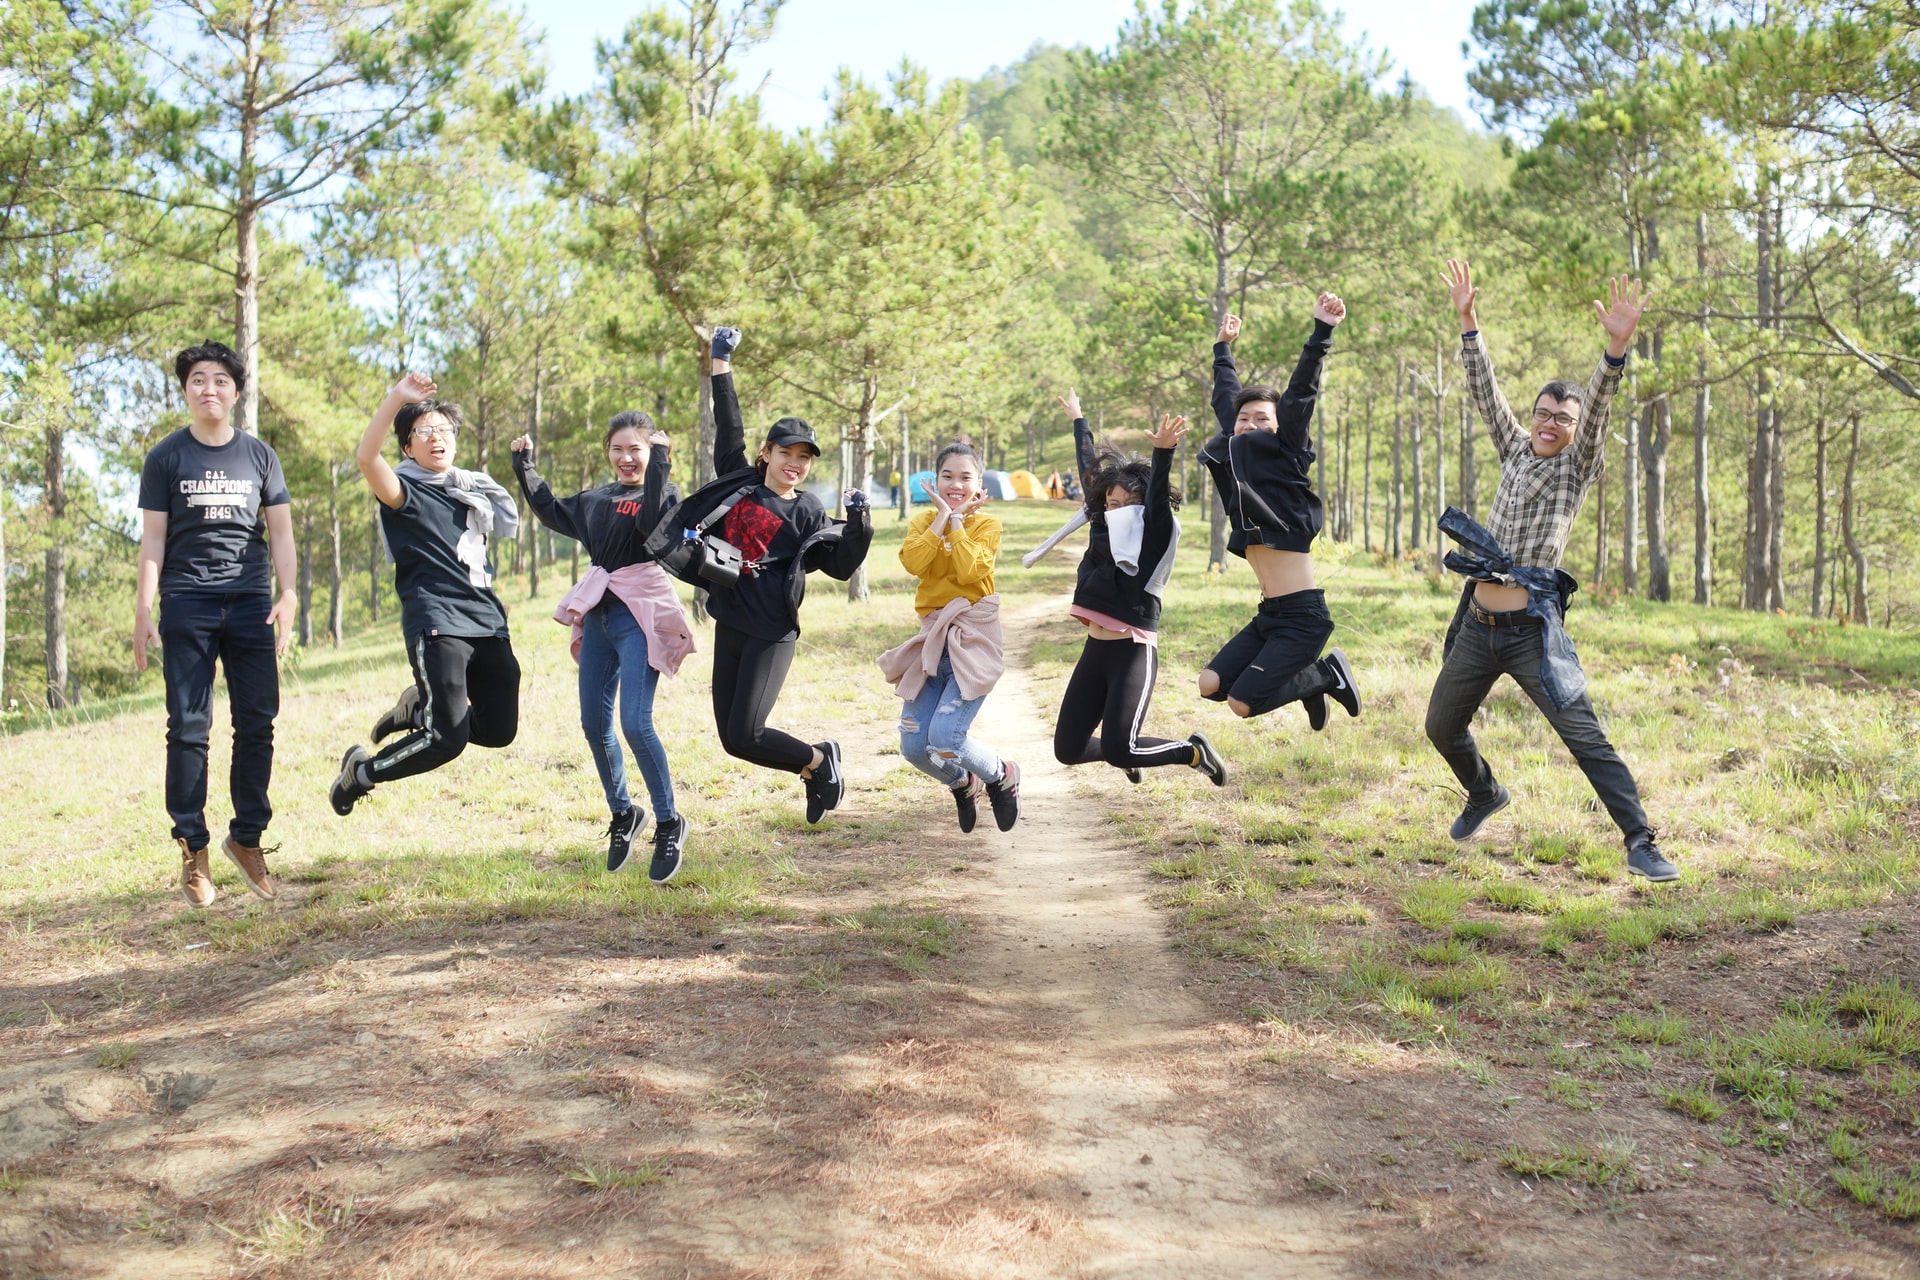 Group of students jumping in a forest